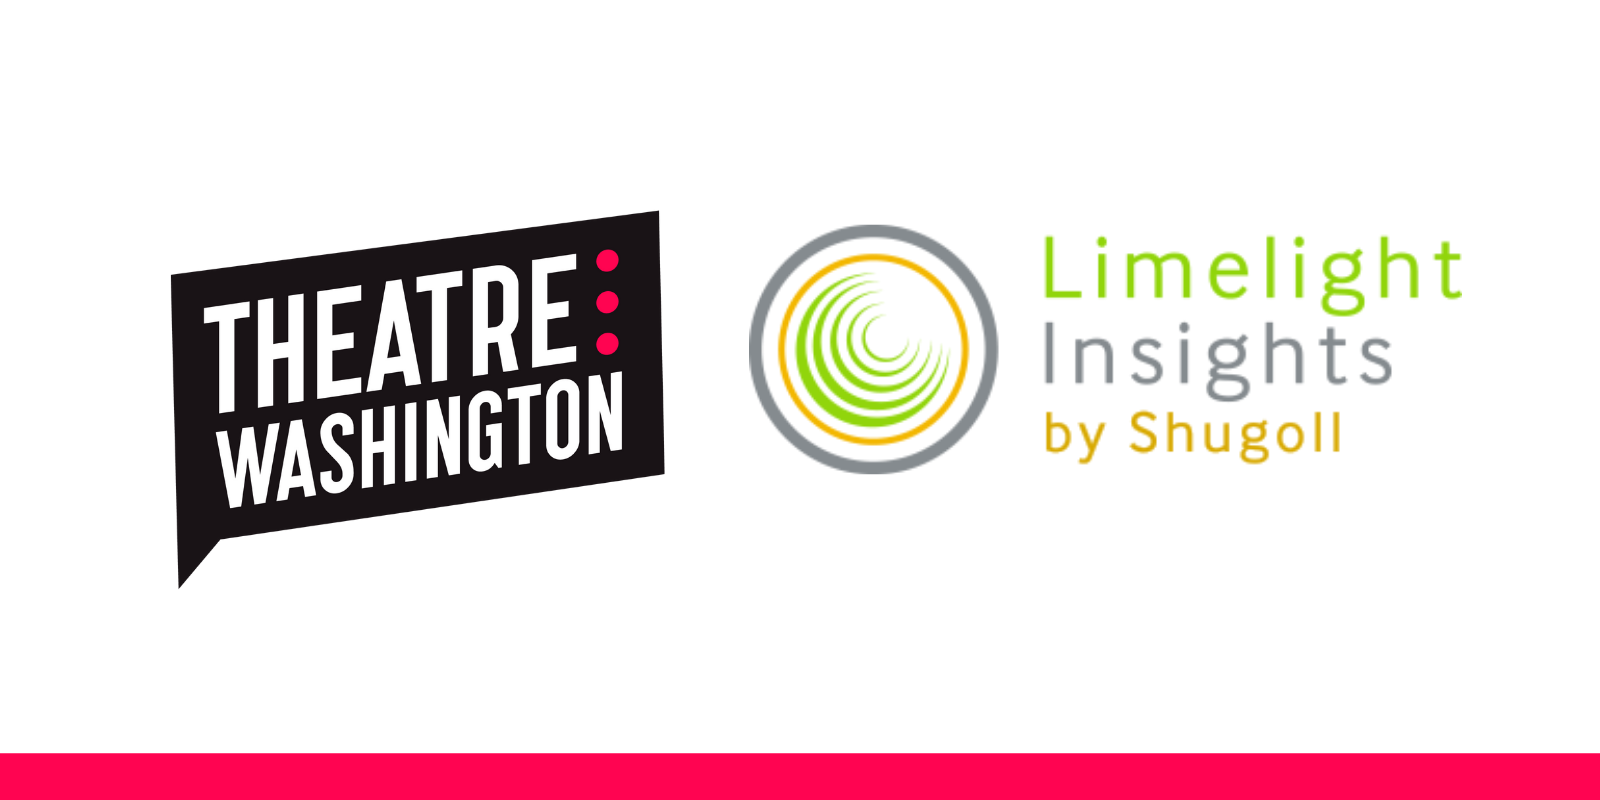 Theatre Washington and Limelight Insights logos